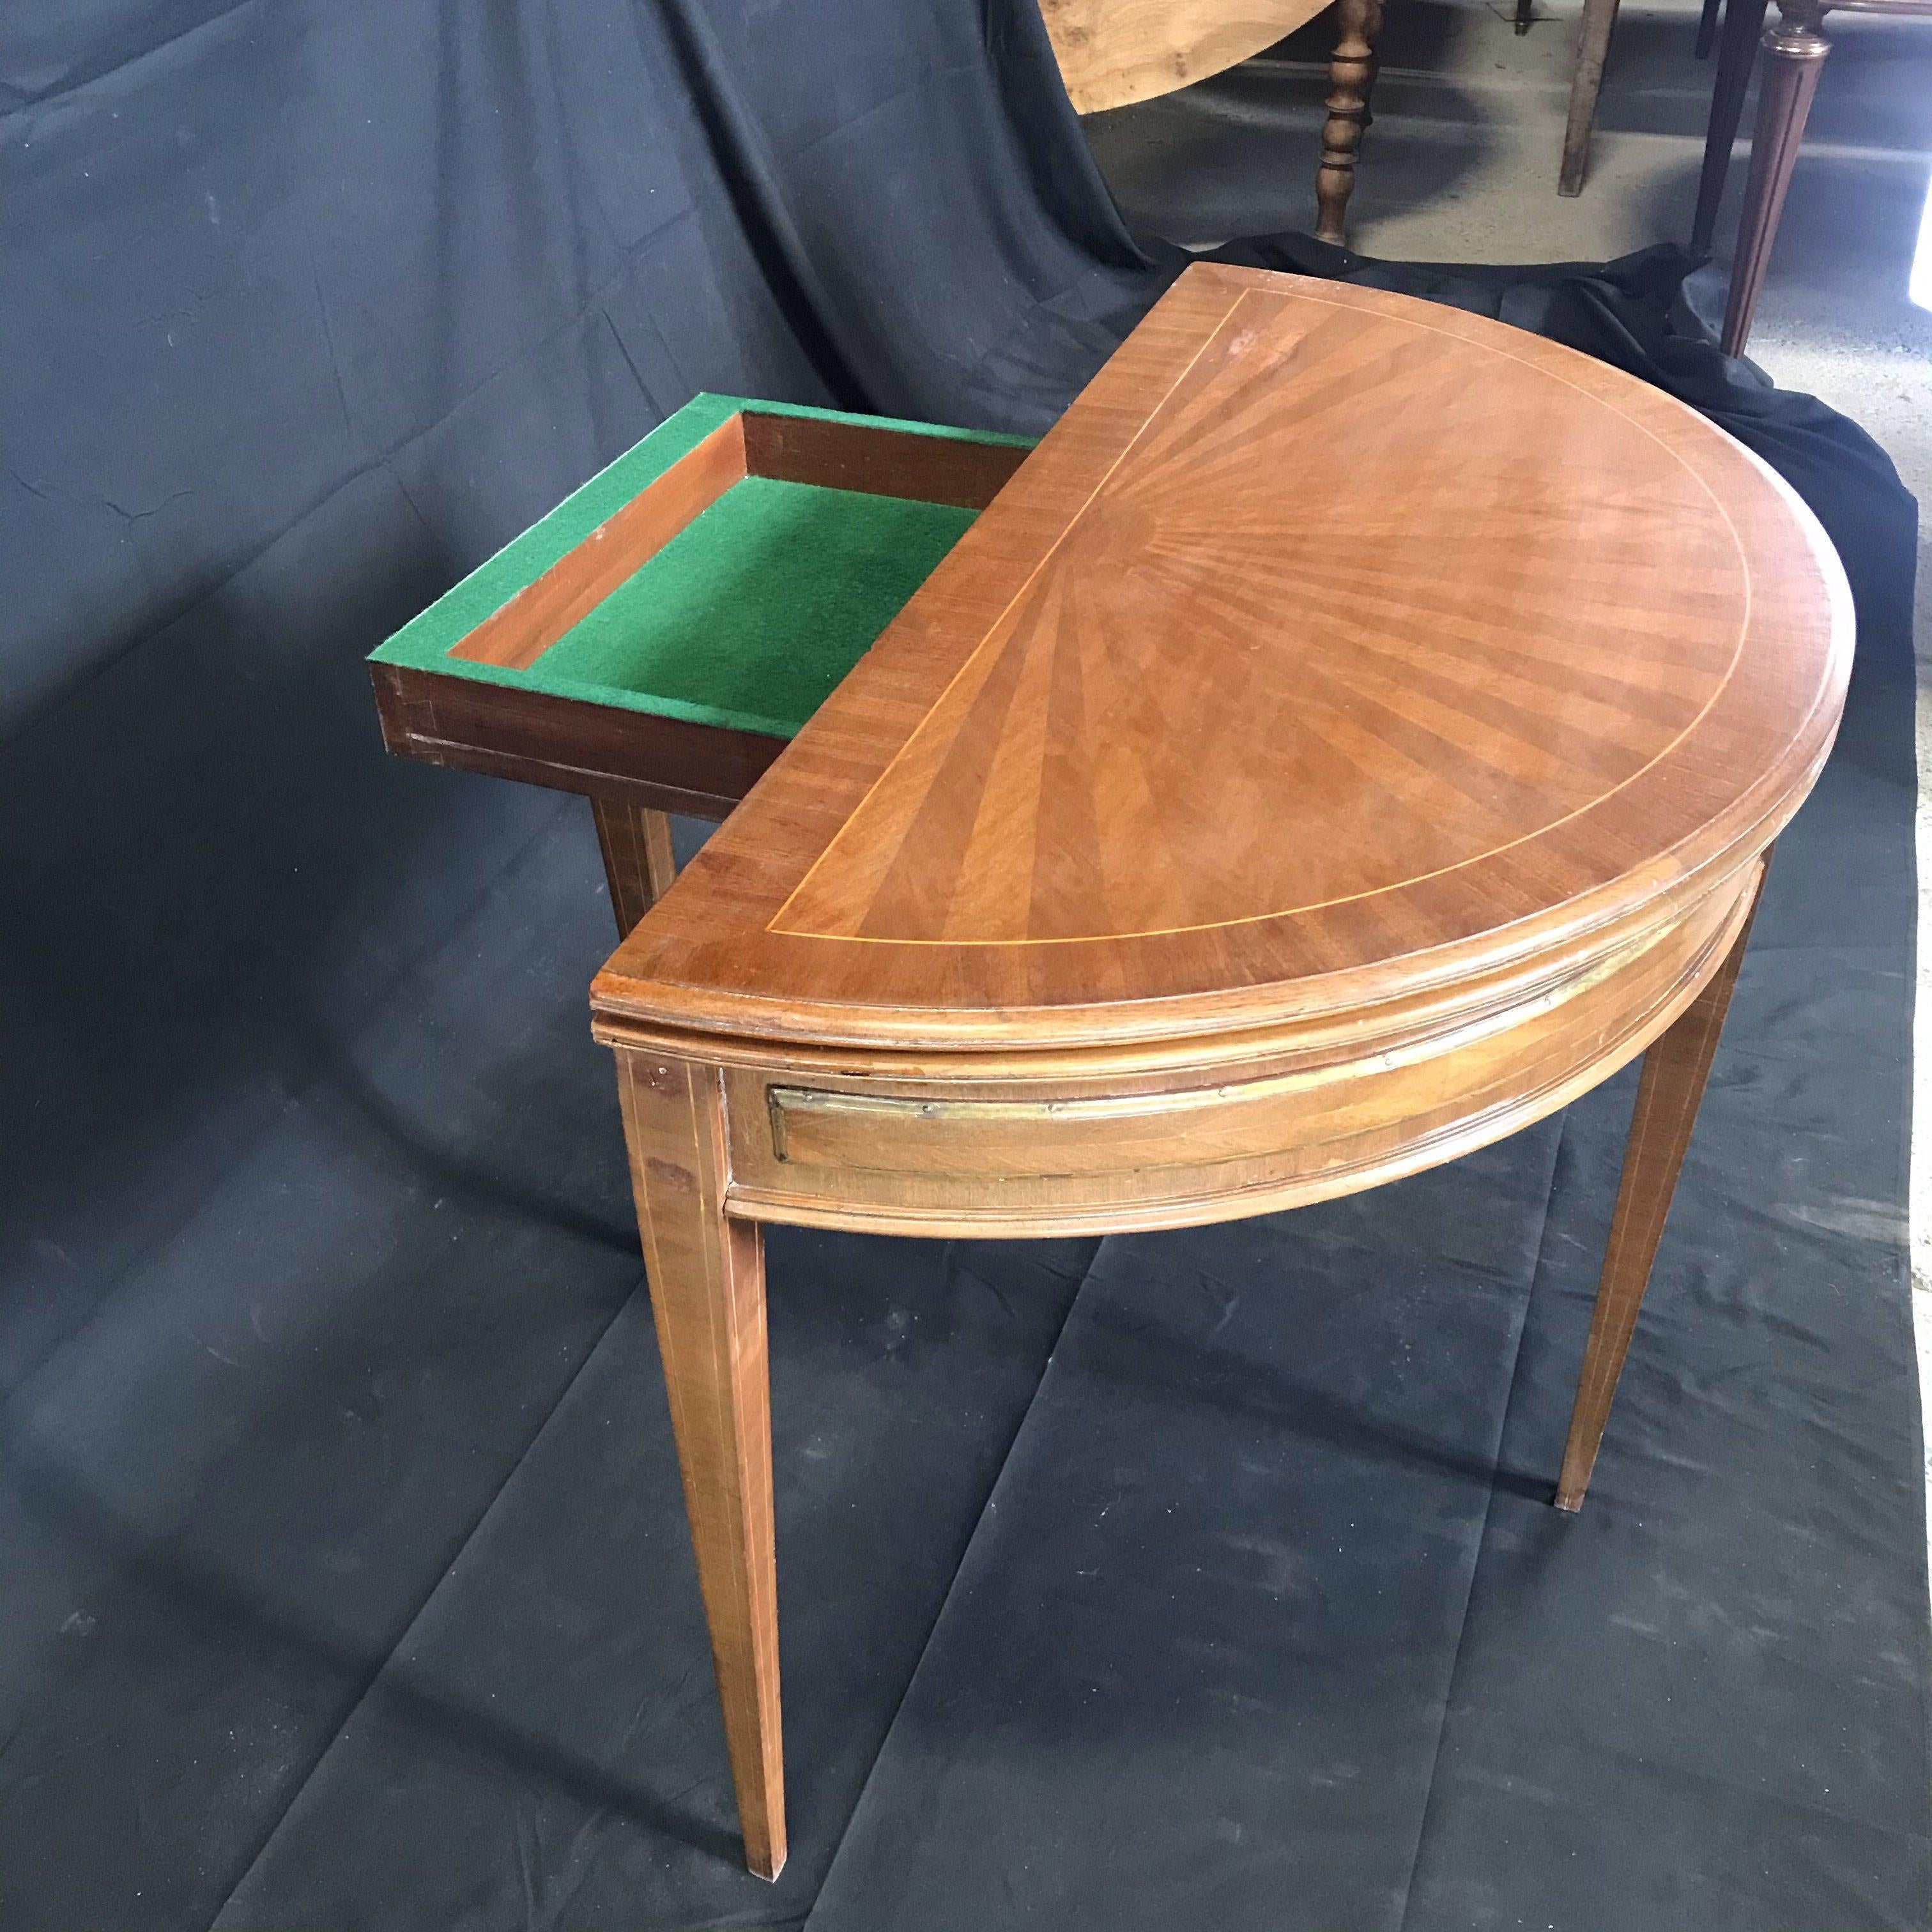 Early 20th Century French Walnut Demilune Table Round Table with Leather Top